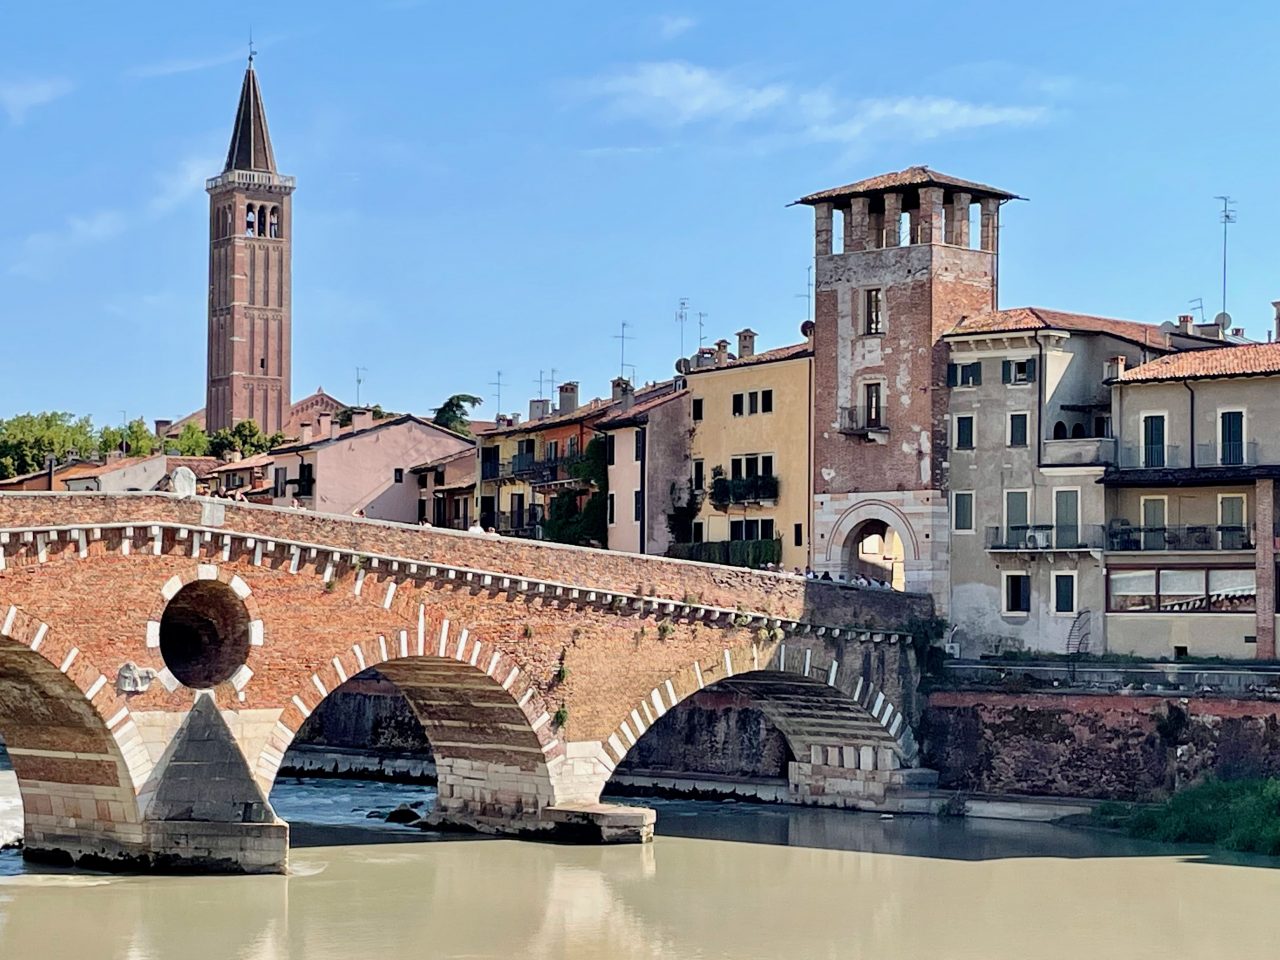 This shows the old city of Verona from the other side of the river